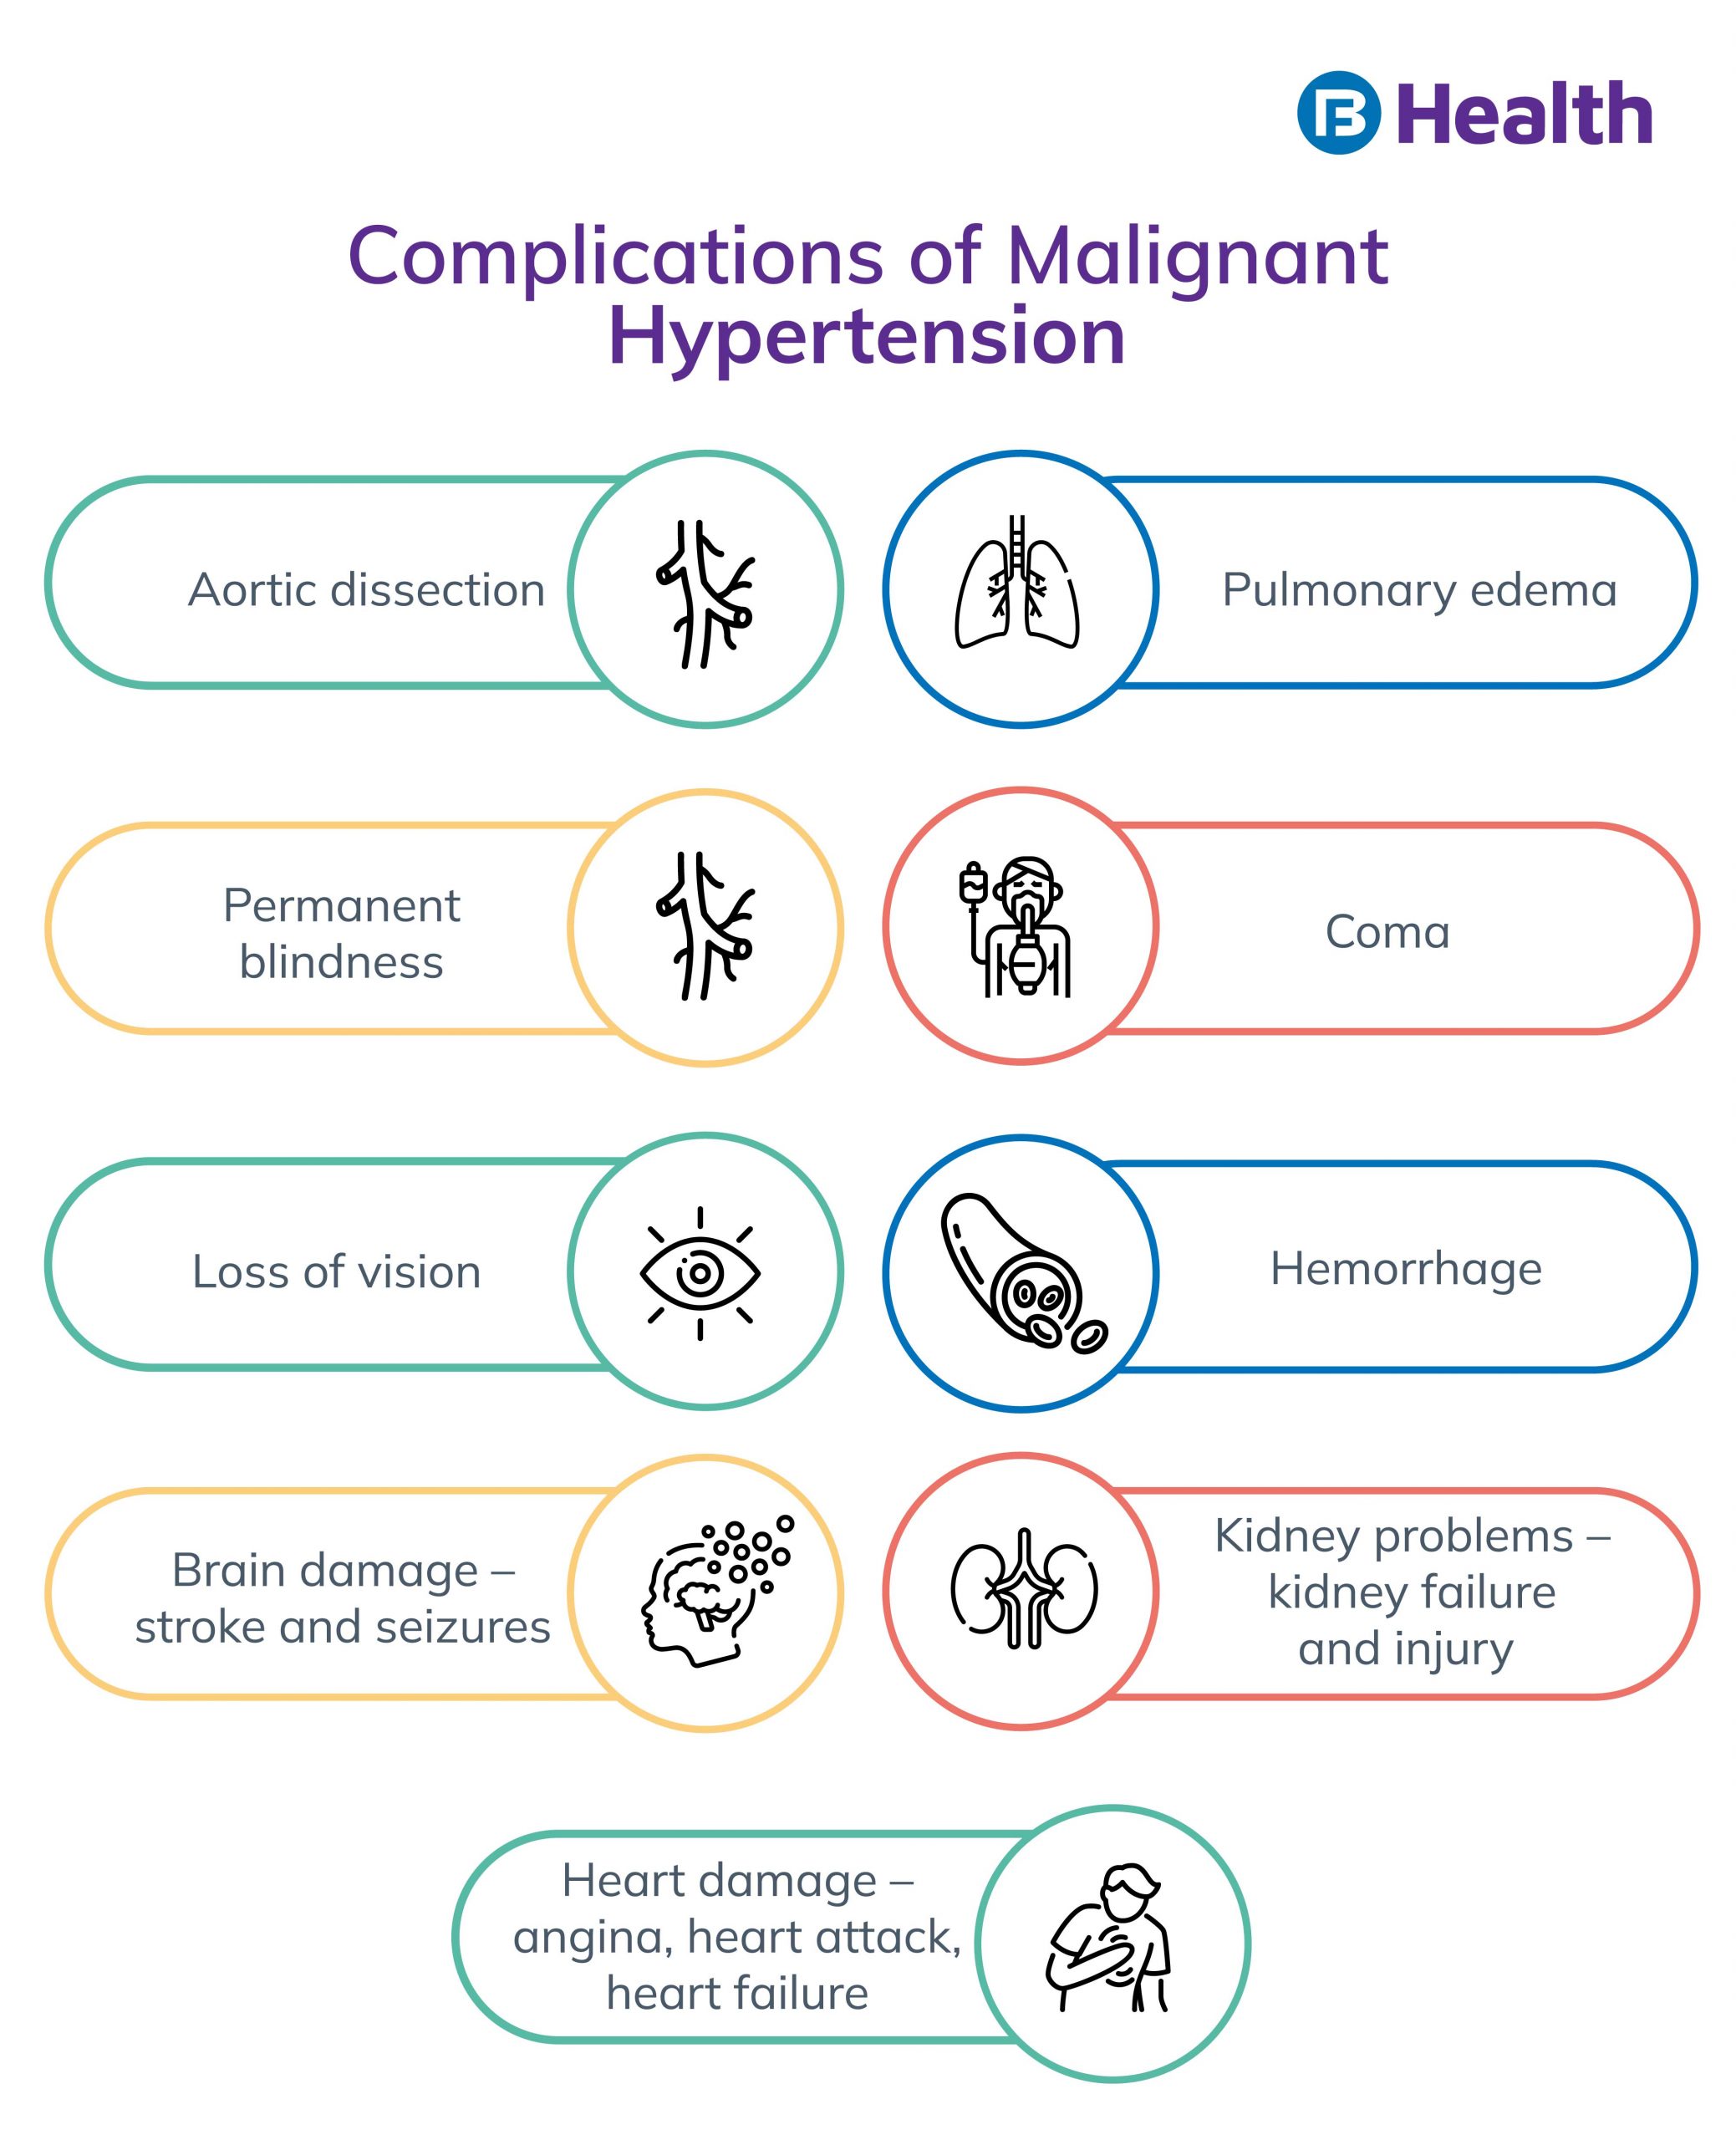 Malignant Hypertension complications infographic